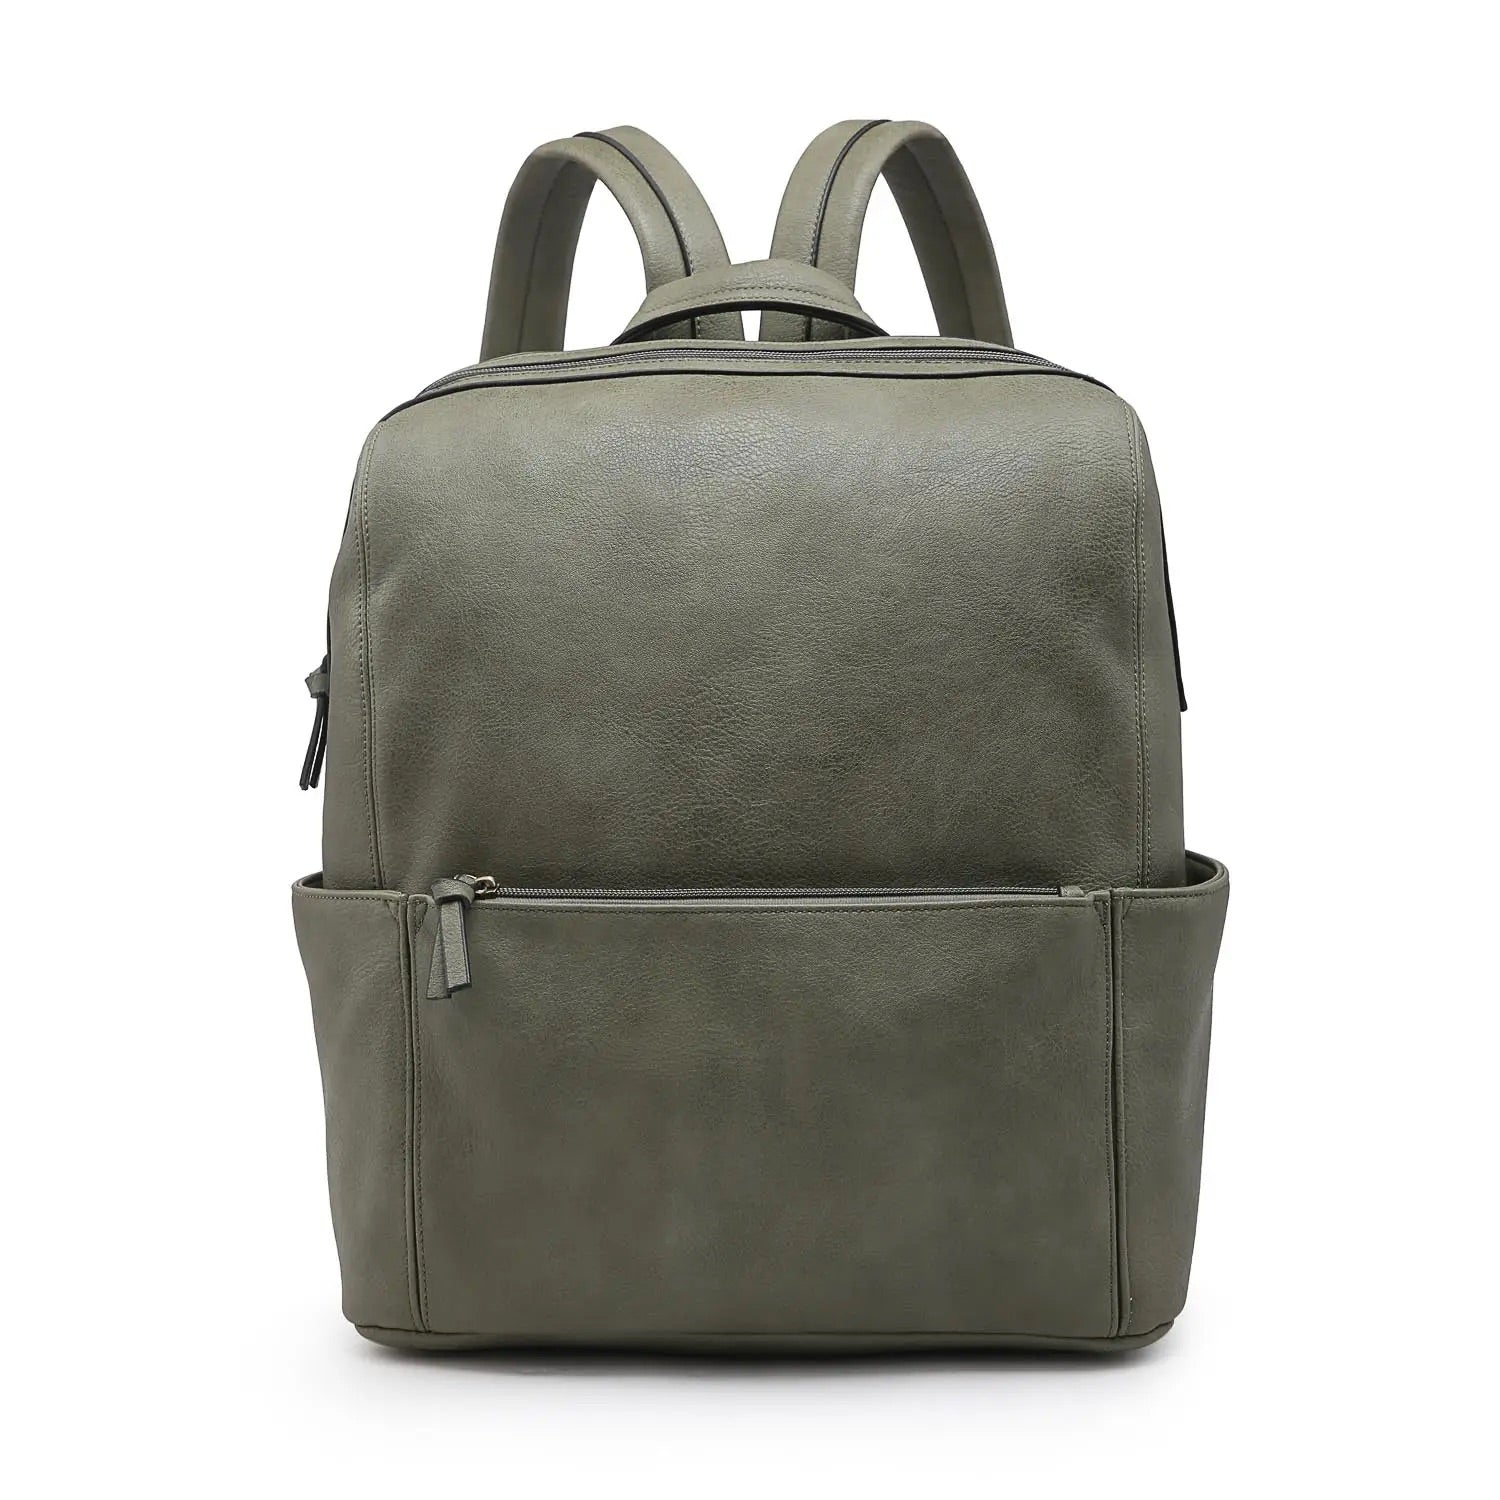 James Backpack - 2 Colors